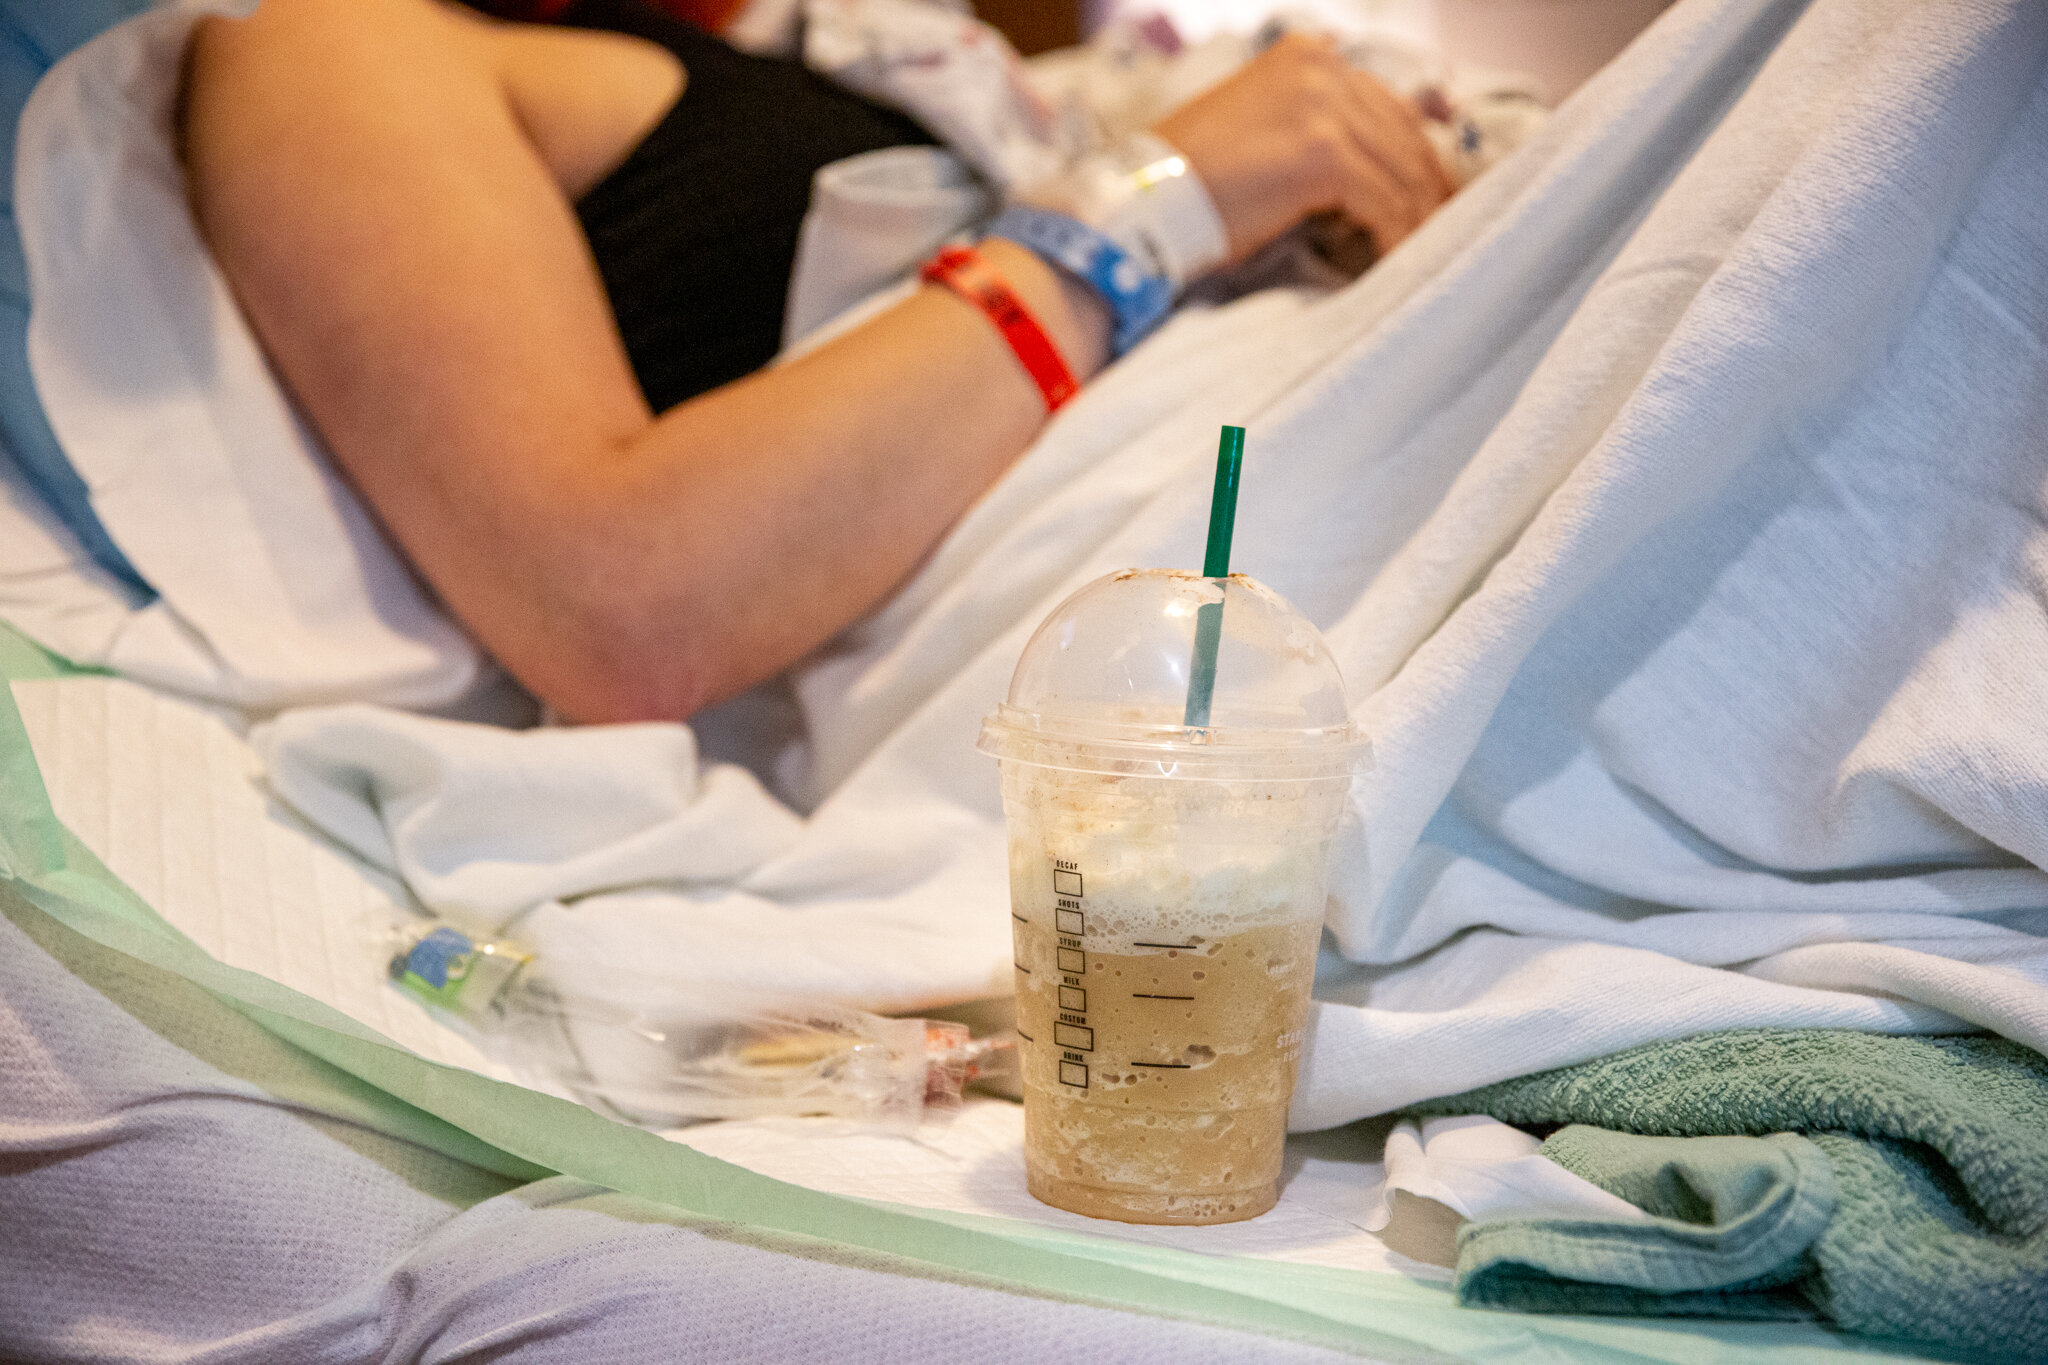 Starbucks cup next to woman in hospital bed